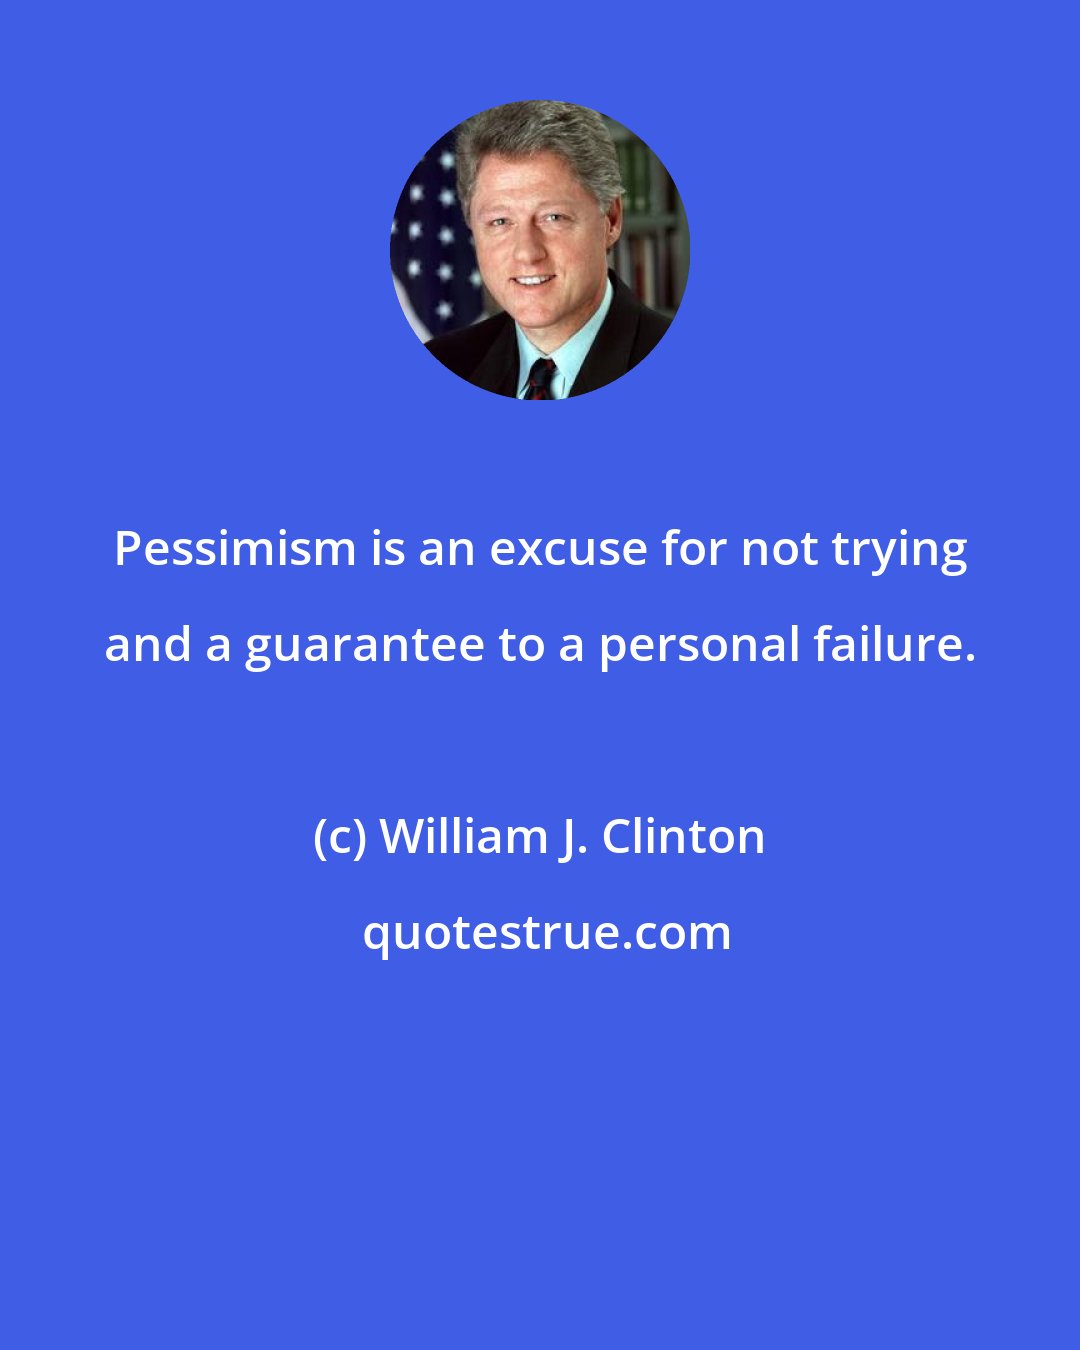 William J. Clinton: Pessimism is an excuse for not trying and a guarantee to a personal failure.